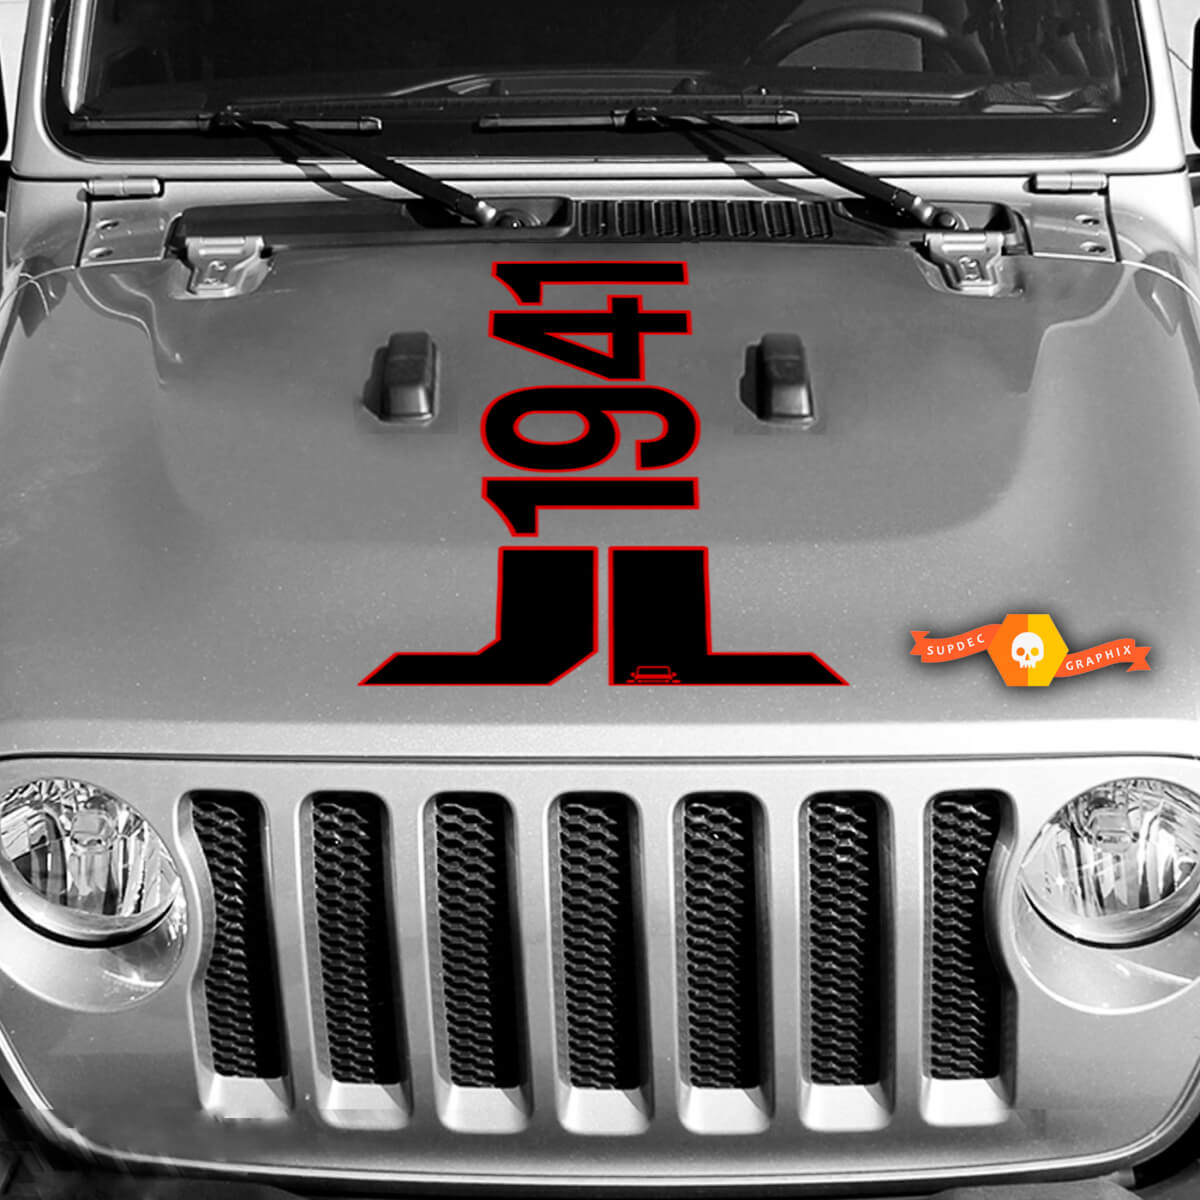 Hood graphics vinyl sticker decal 1941 fit for Jeep Wrangler JL 2018 2019 2020